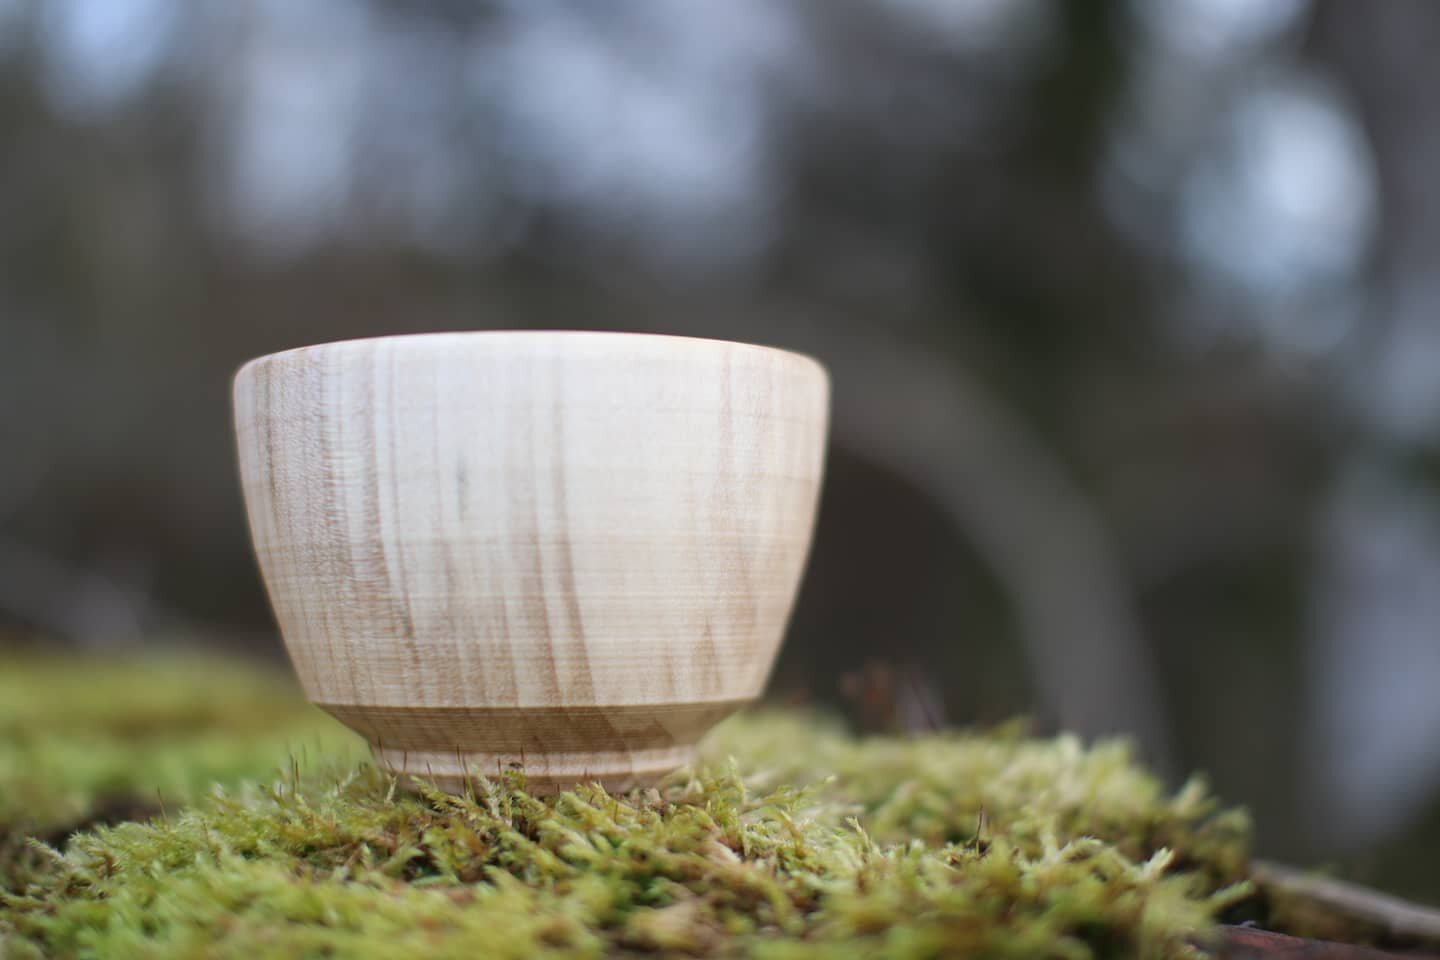 Yesterday's little teabowl/cup. Feels good to be turning again. 

 #teabowl #chairmaking #spoonsaregoodforyou  #woodenspoon #woodencup #spooncarving  #bowlturning #polelathe #greenwoodworking #sl&ouml;jd #bushcraft #newwoodculture #madetobeused #maki